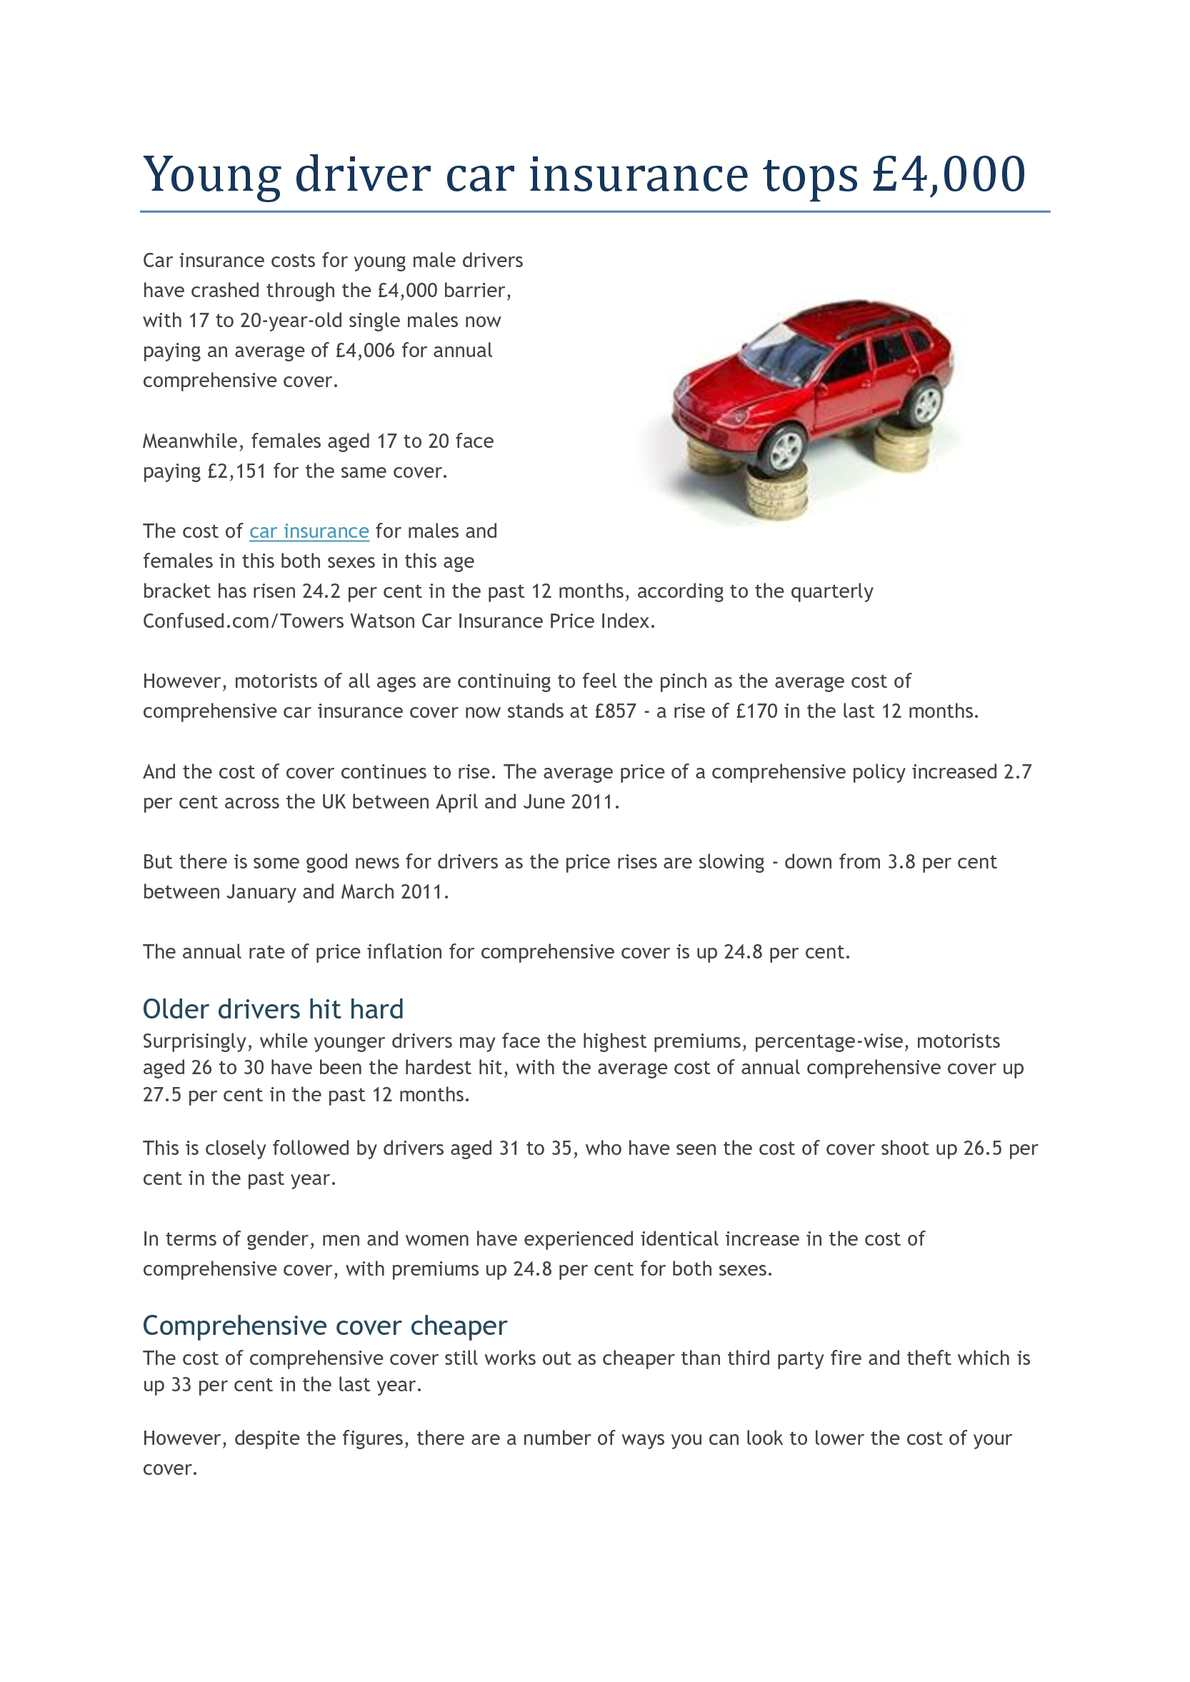 Calamo Young Drivers Car Insurance Tops 4000 in dimensions 1190 X 1682